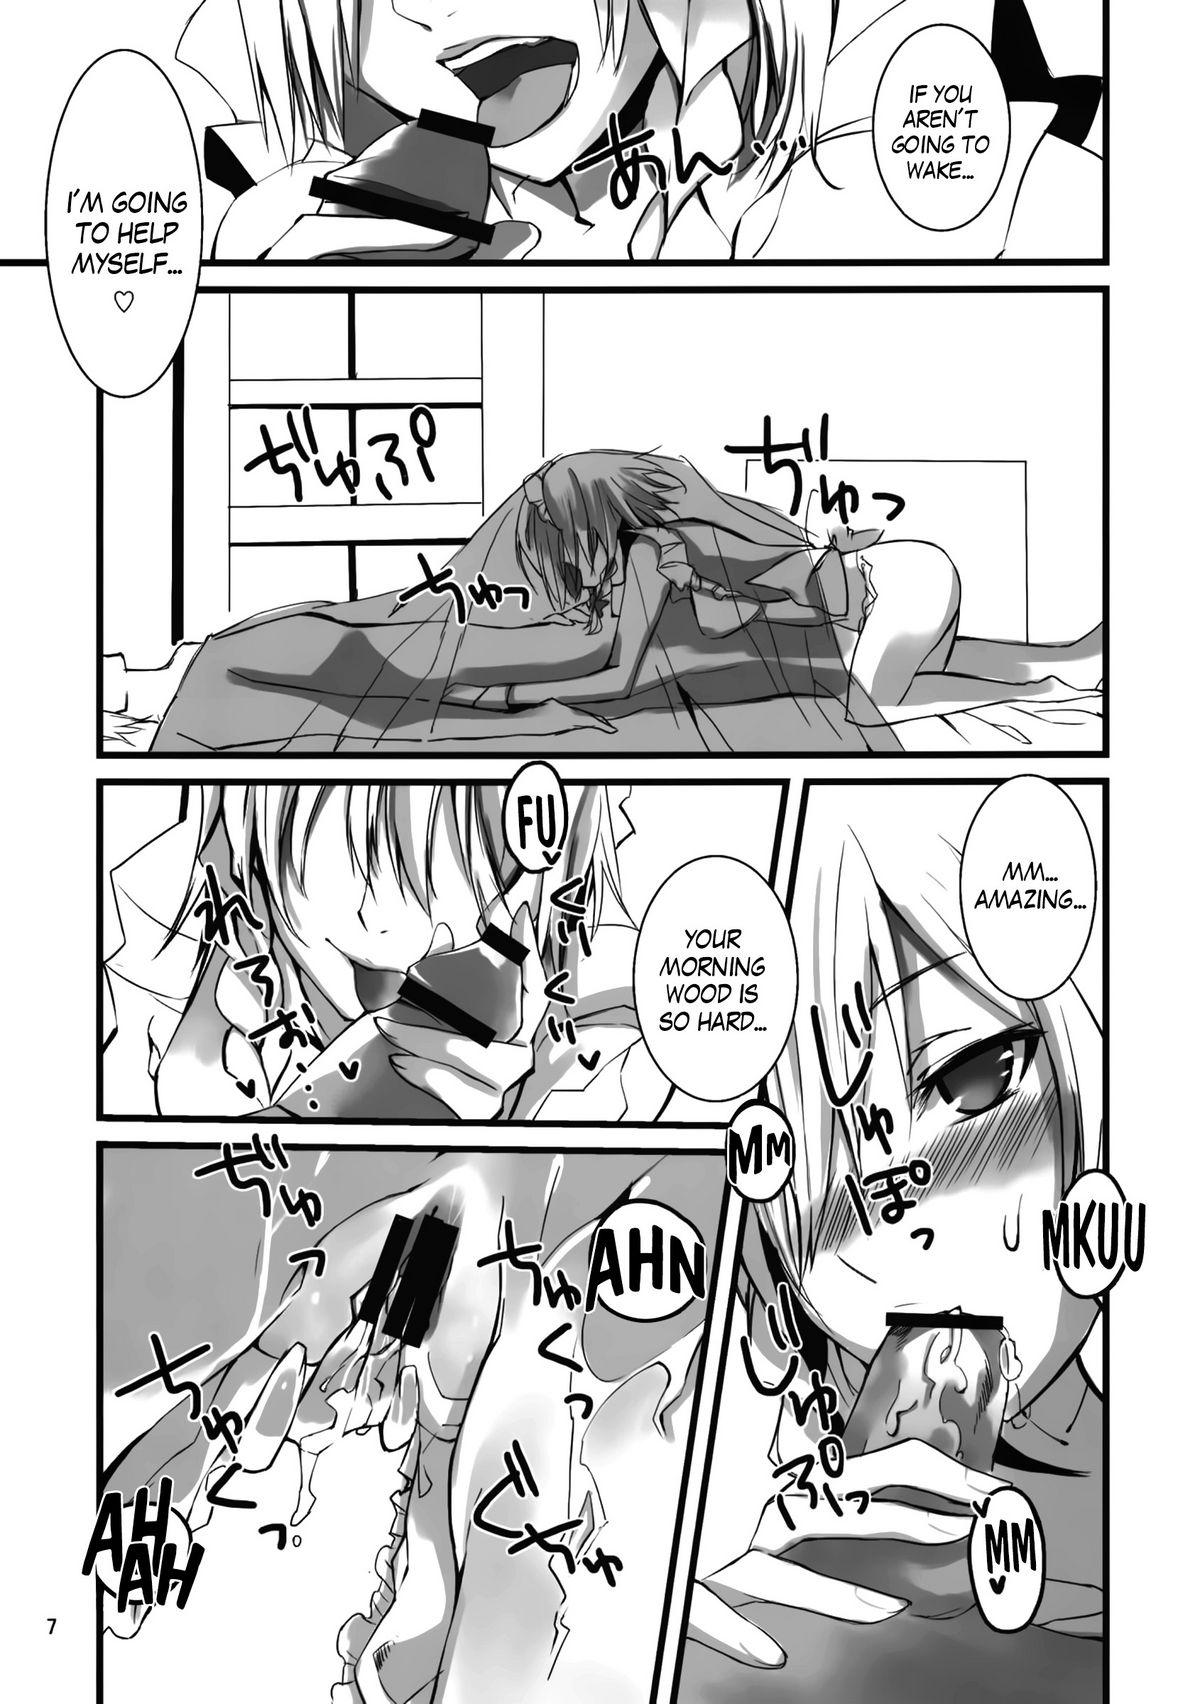 Cuck 1 day my maid - Touhou project Amigo - Page 7